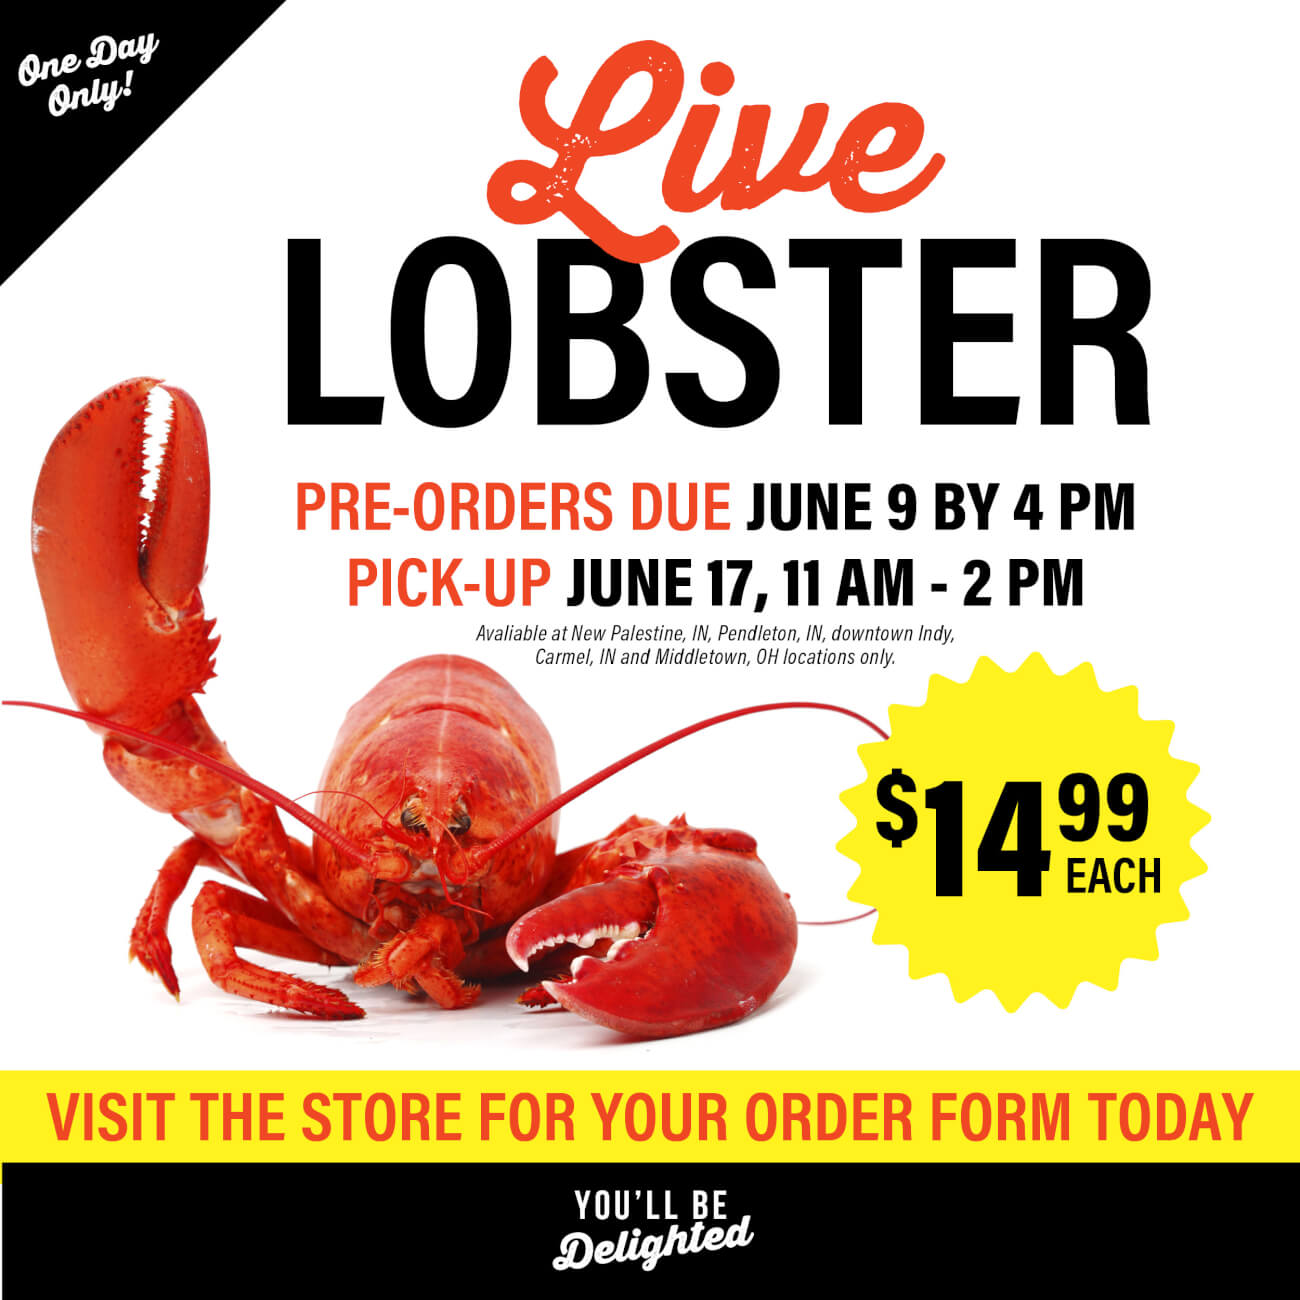 Live lobster! Pre-orders due June 9th, Pick-Up June 17th. $14.99 each. Visit the store for your order form today